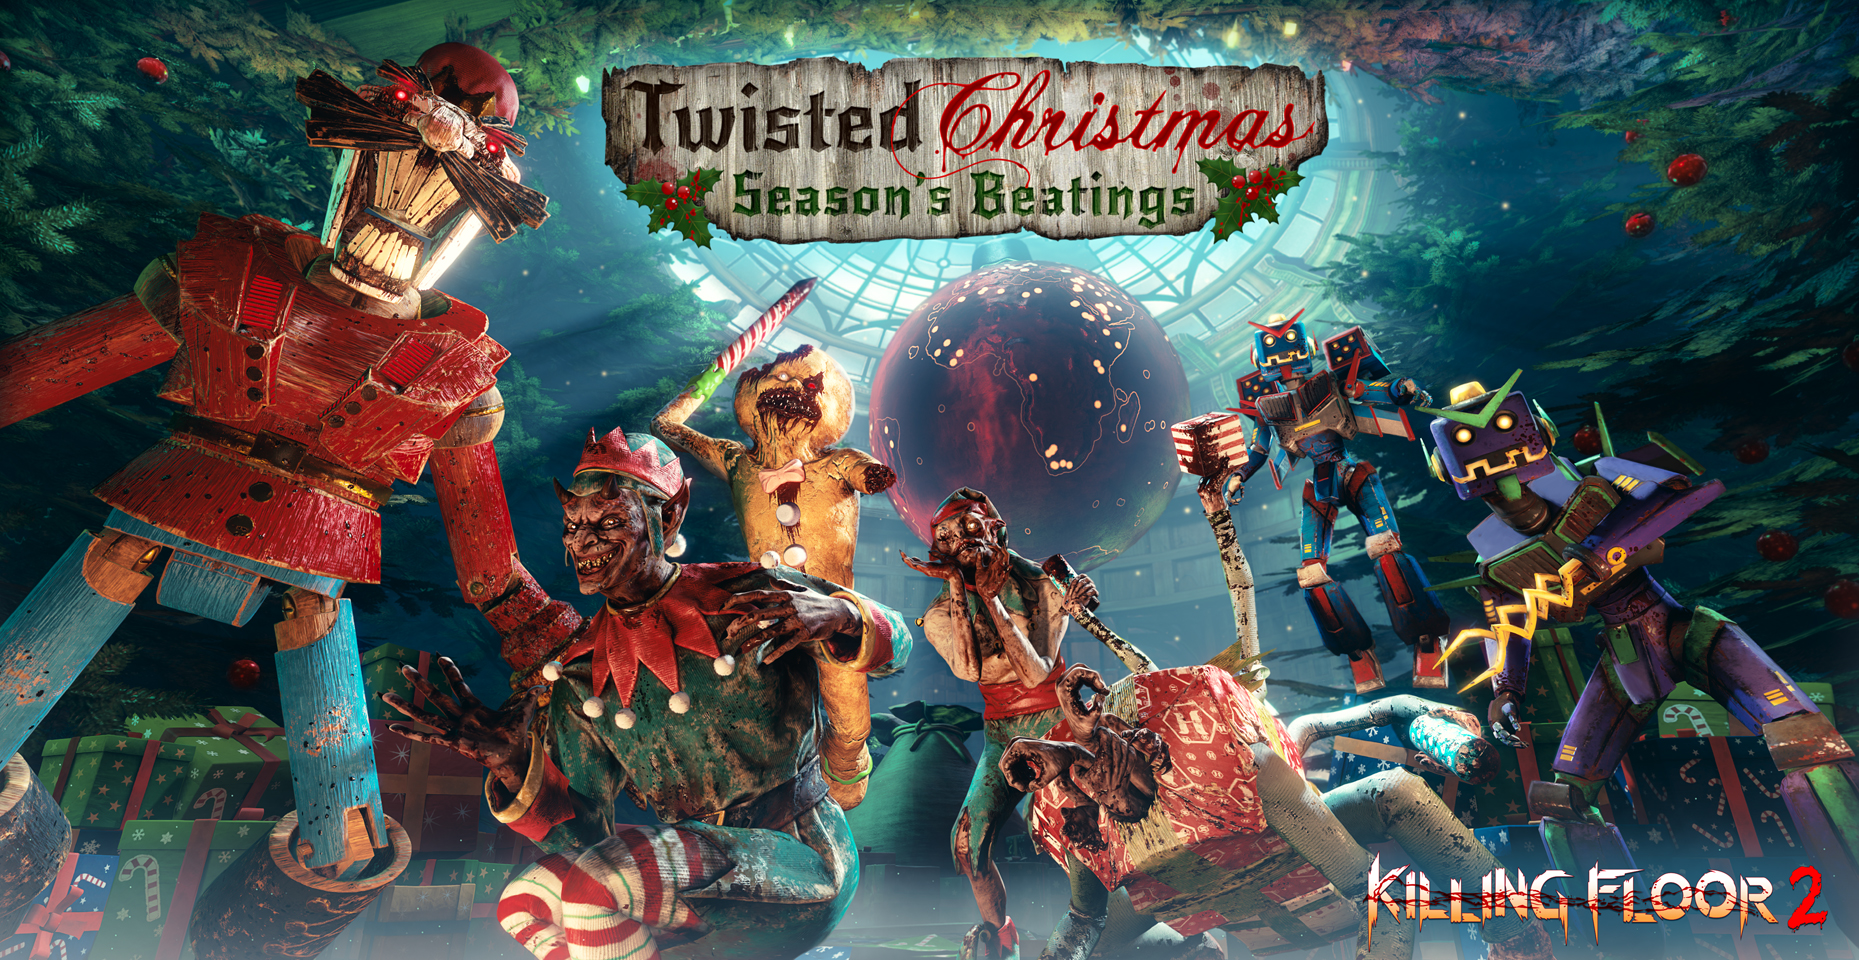 Gary Busey Stars in Killing Floor 2 Twisted Christmas